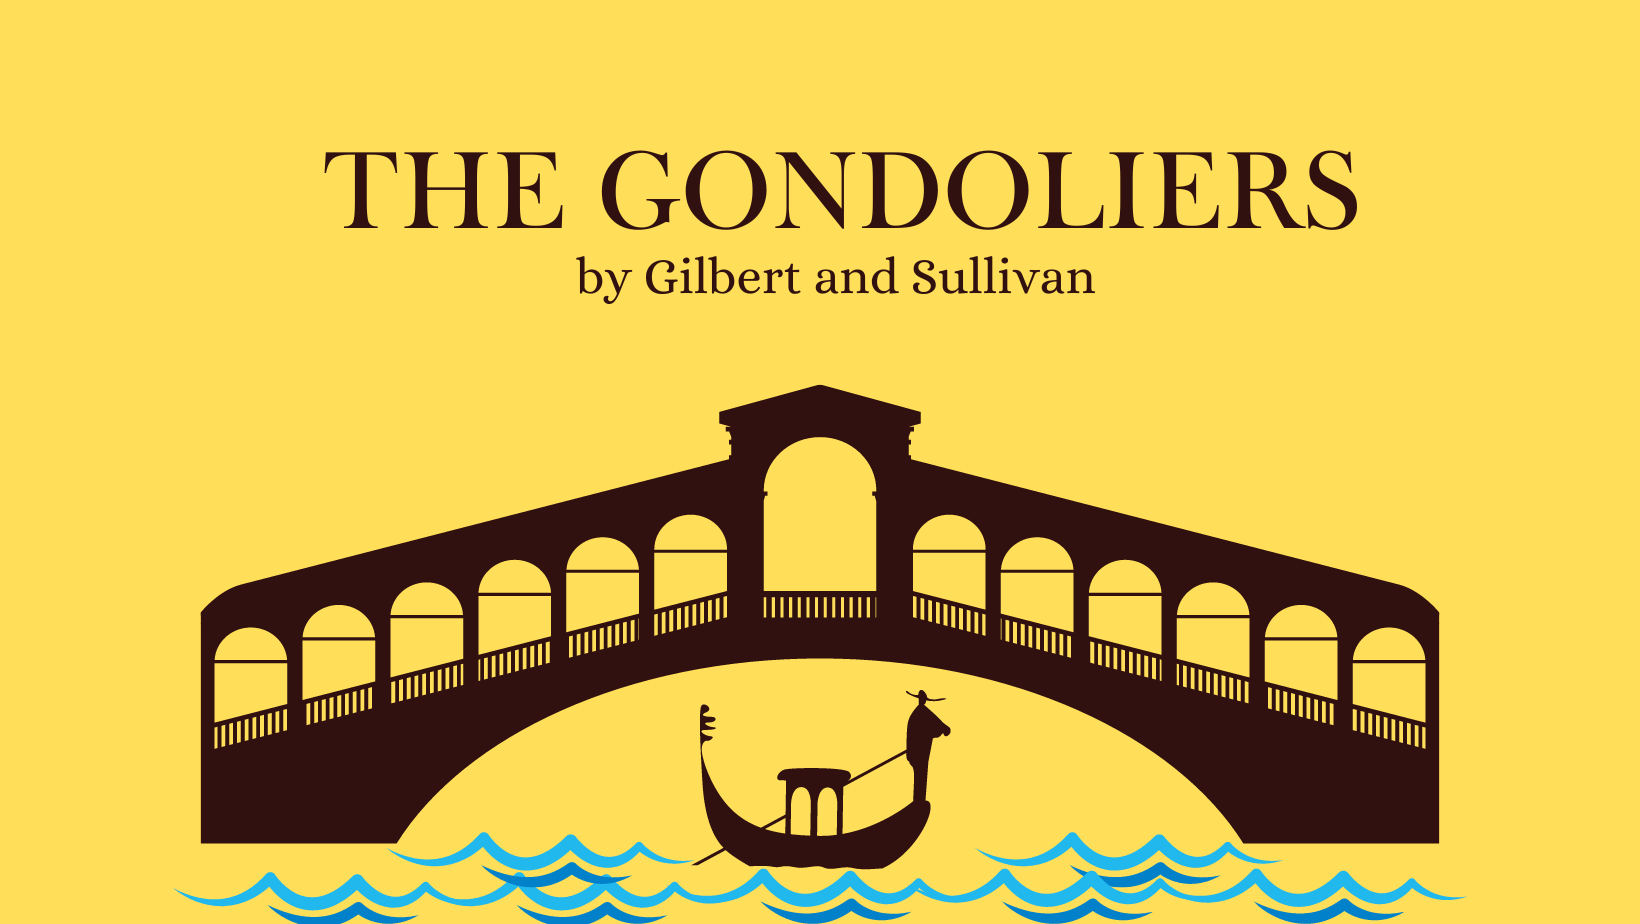  Text reads: The Gondoliers by Gilbert and Sullivan. Image shows the silhouette of a gondola under a bridge  